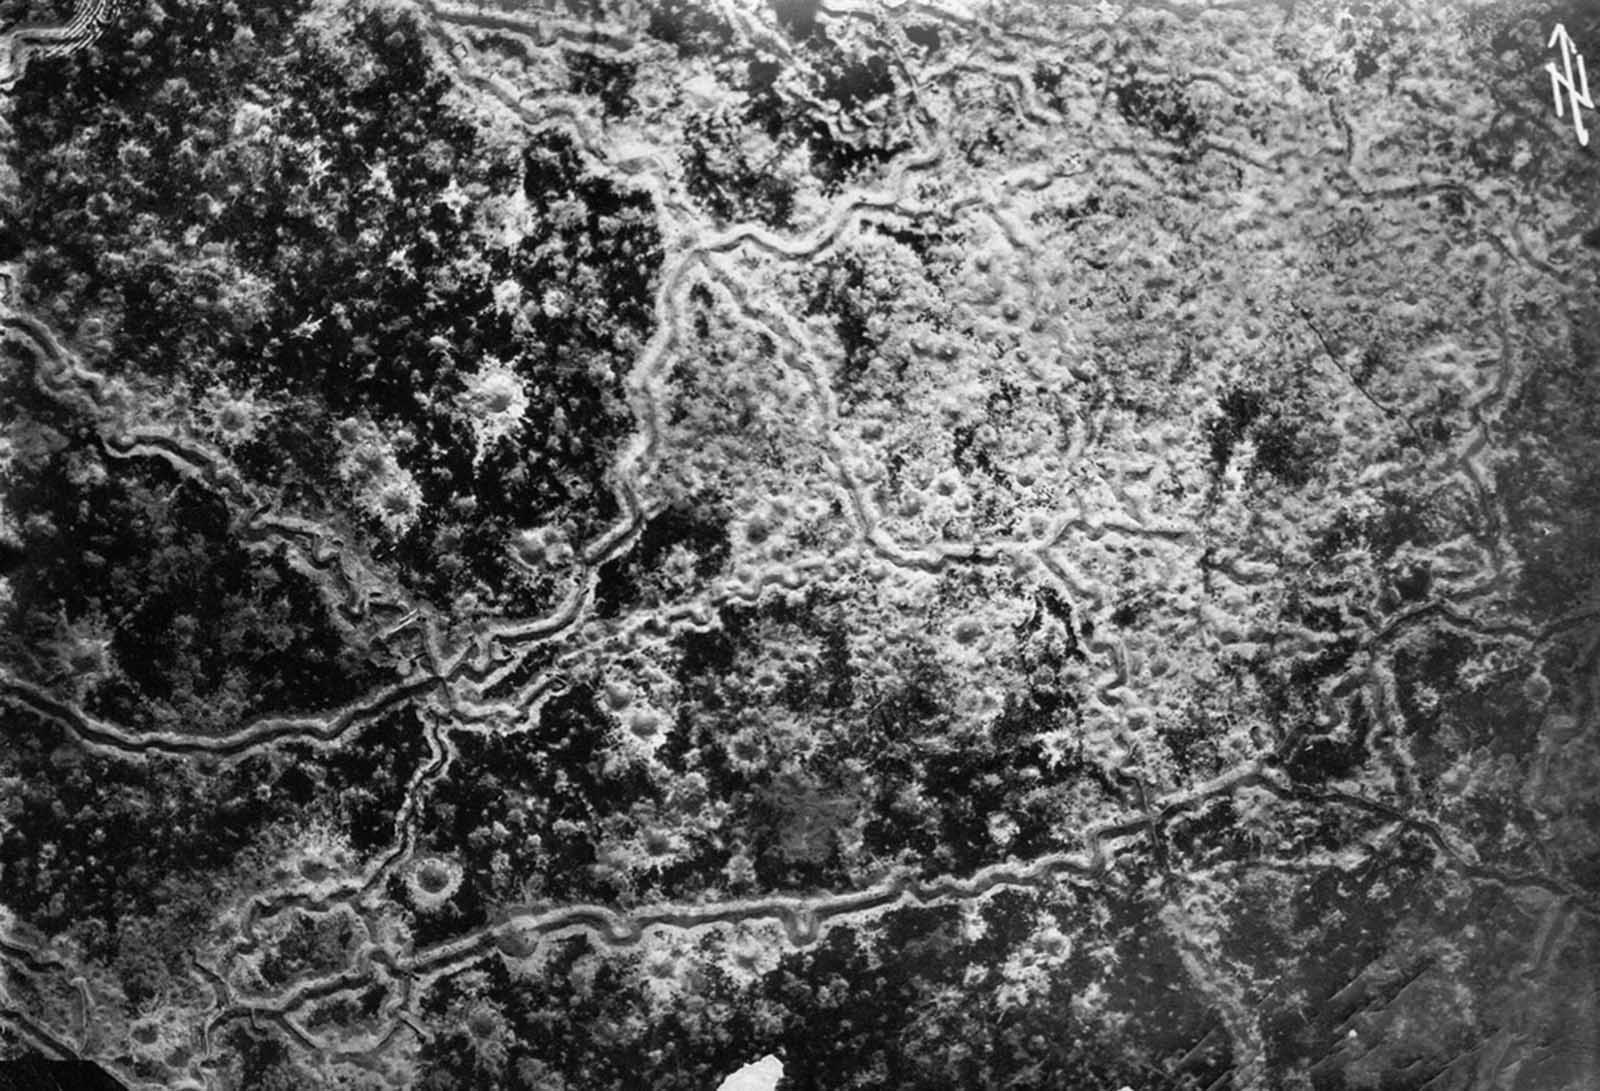 Aerial reconnaissance photograph showing a landscape scarred by trench lines and artillery craters. Photograph by pilot Richard Scholl and his co-pilot Lieutenant Anderer near Guignicourt, northern France, August 8, 1918. One month later, Richard Scholl was reported missing.